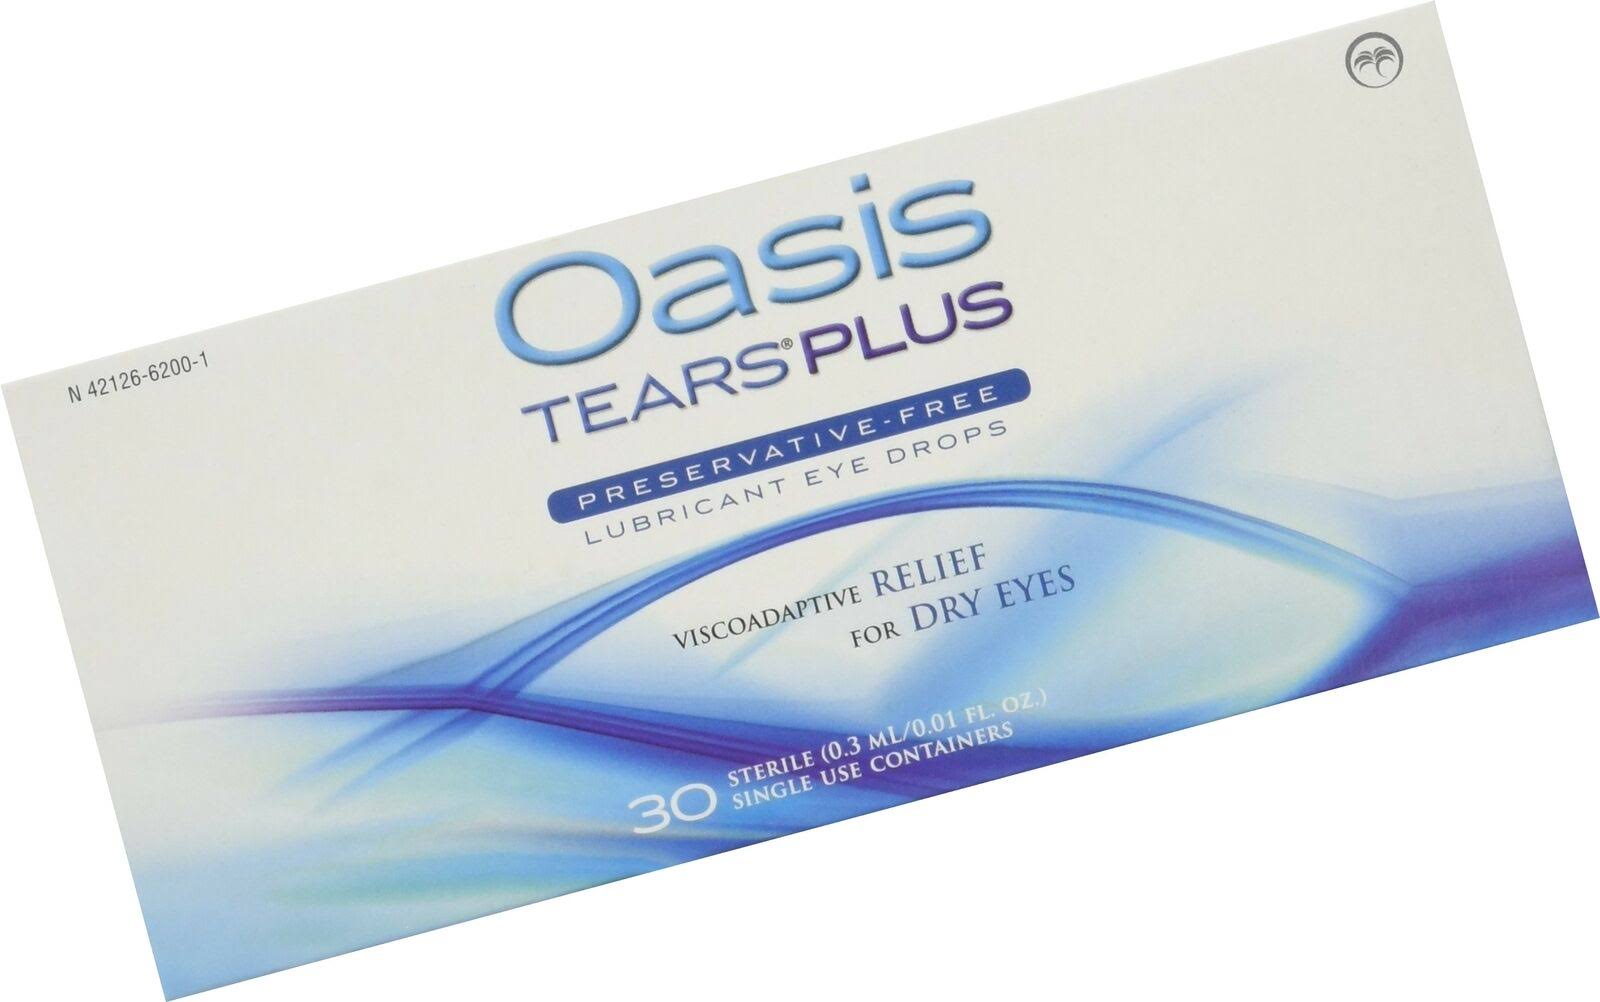 Oasis Tears Plus Preservative-Free Lubricant Eye Drops, 30 Containers